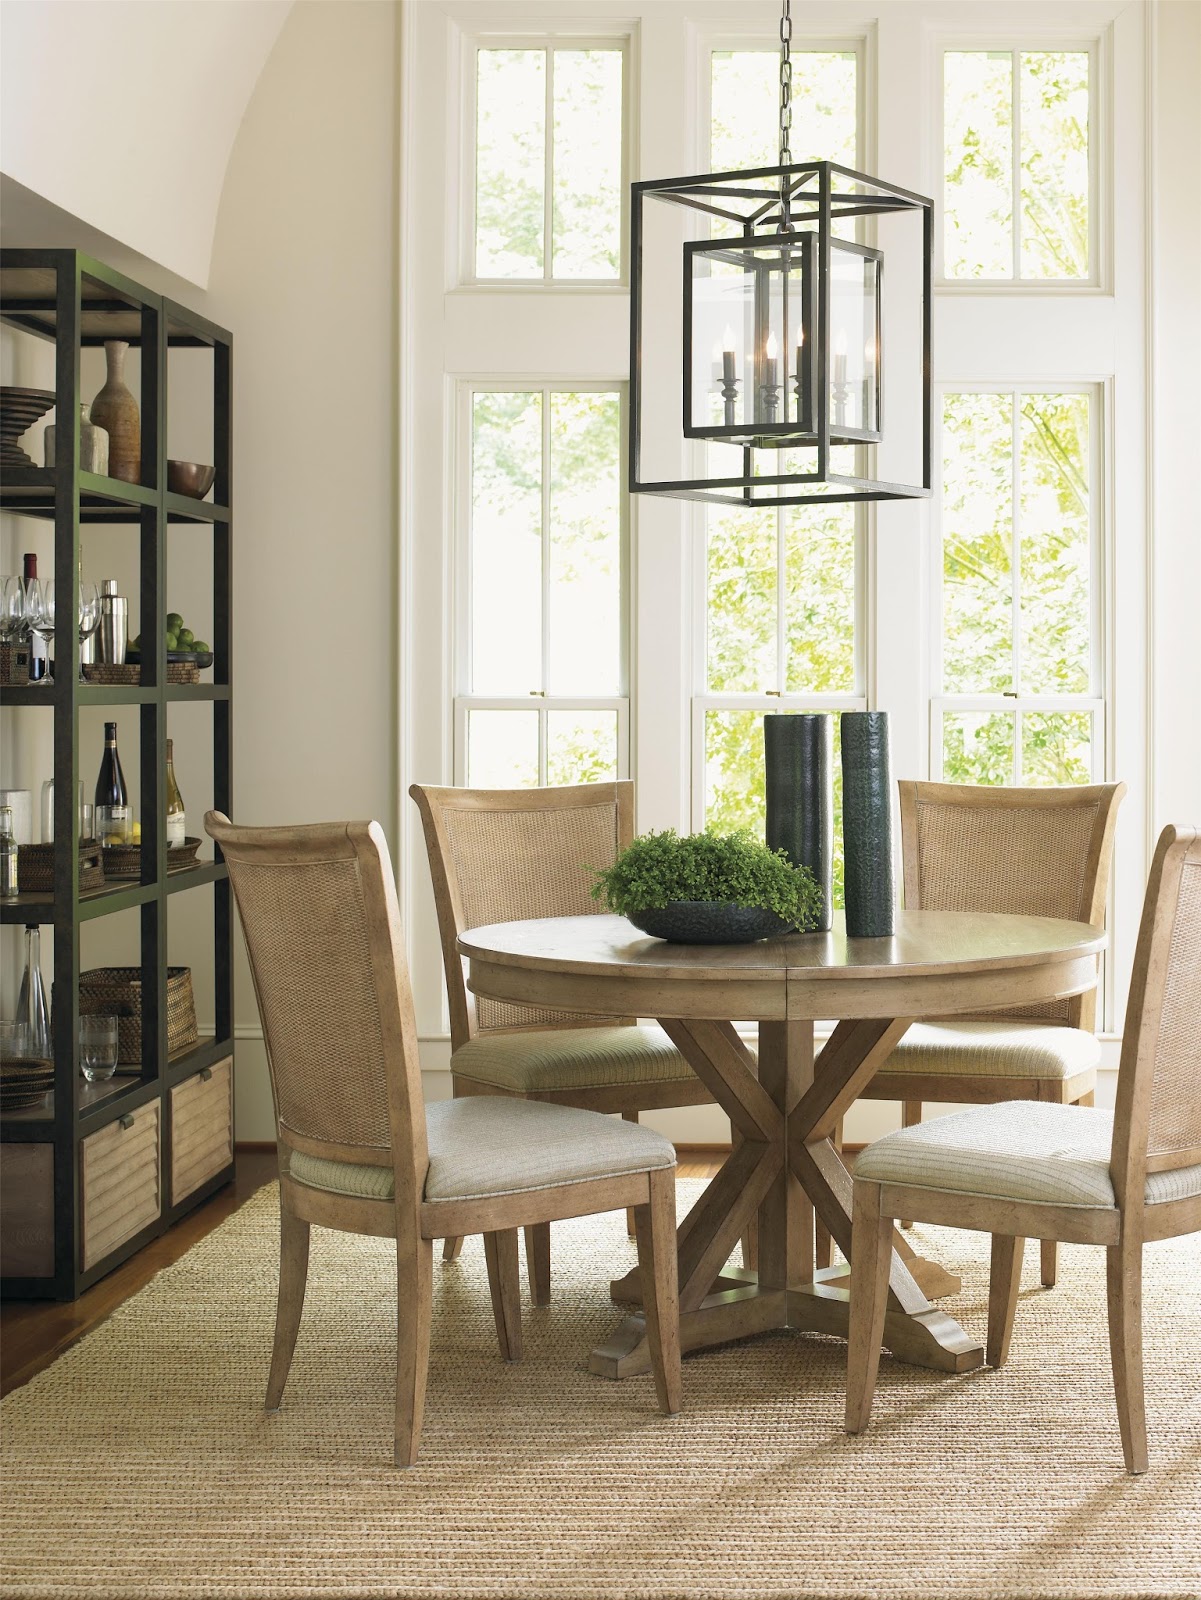 Baer's Furniture Store: Dining Room Sets for Casual ...